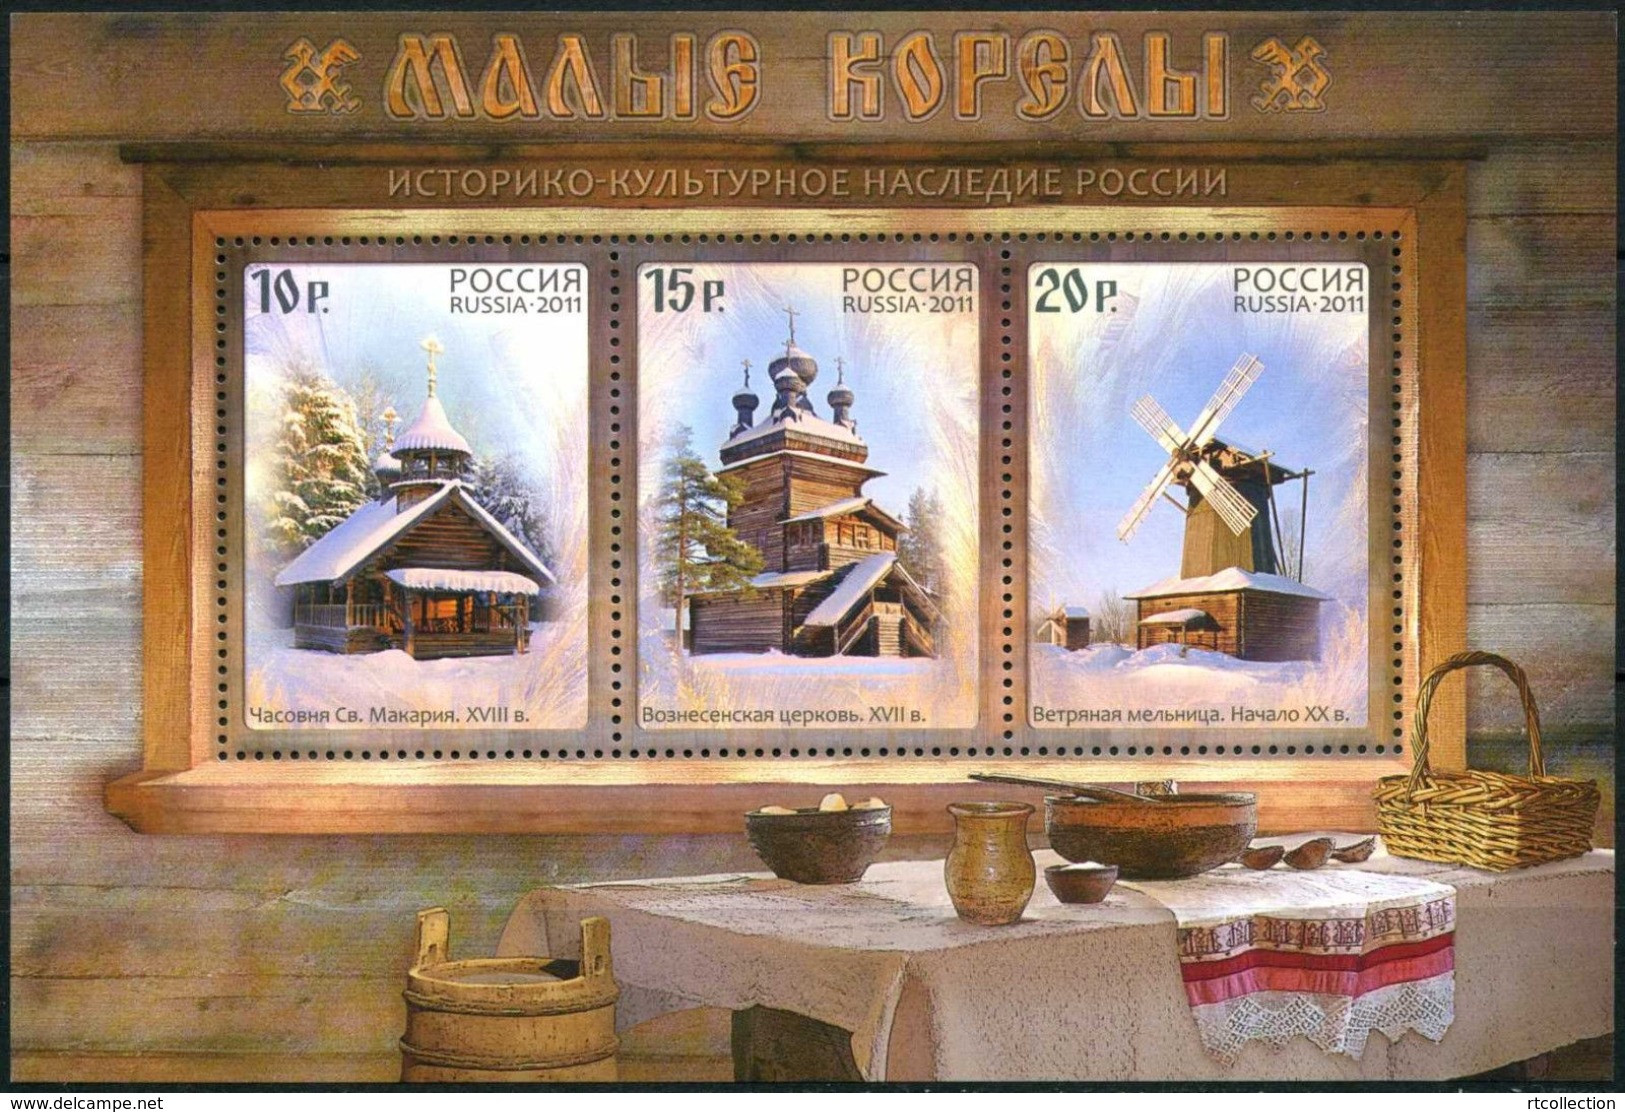 Russia 2011 Souvenir Pack Booklet FDC Museum Wooden Architecture Folk Art Malye Korely Historical Culture Heritage Stamp - Collezioni